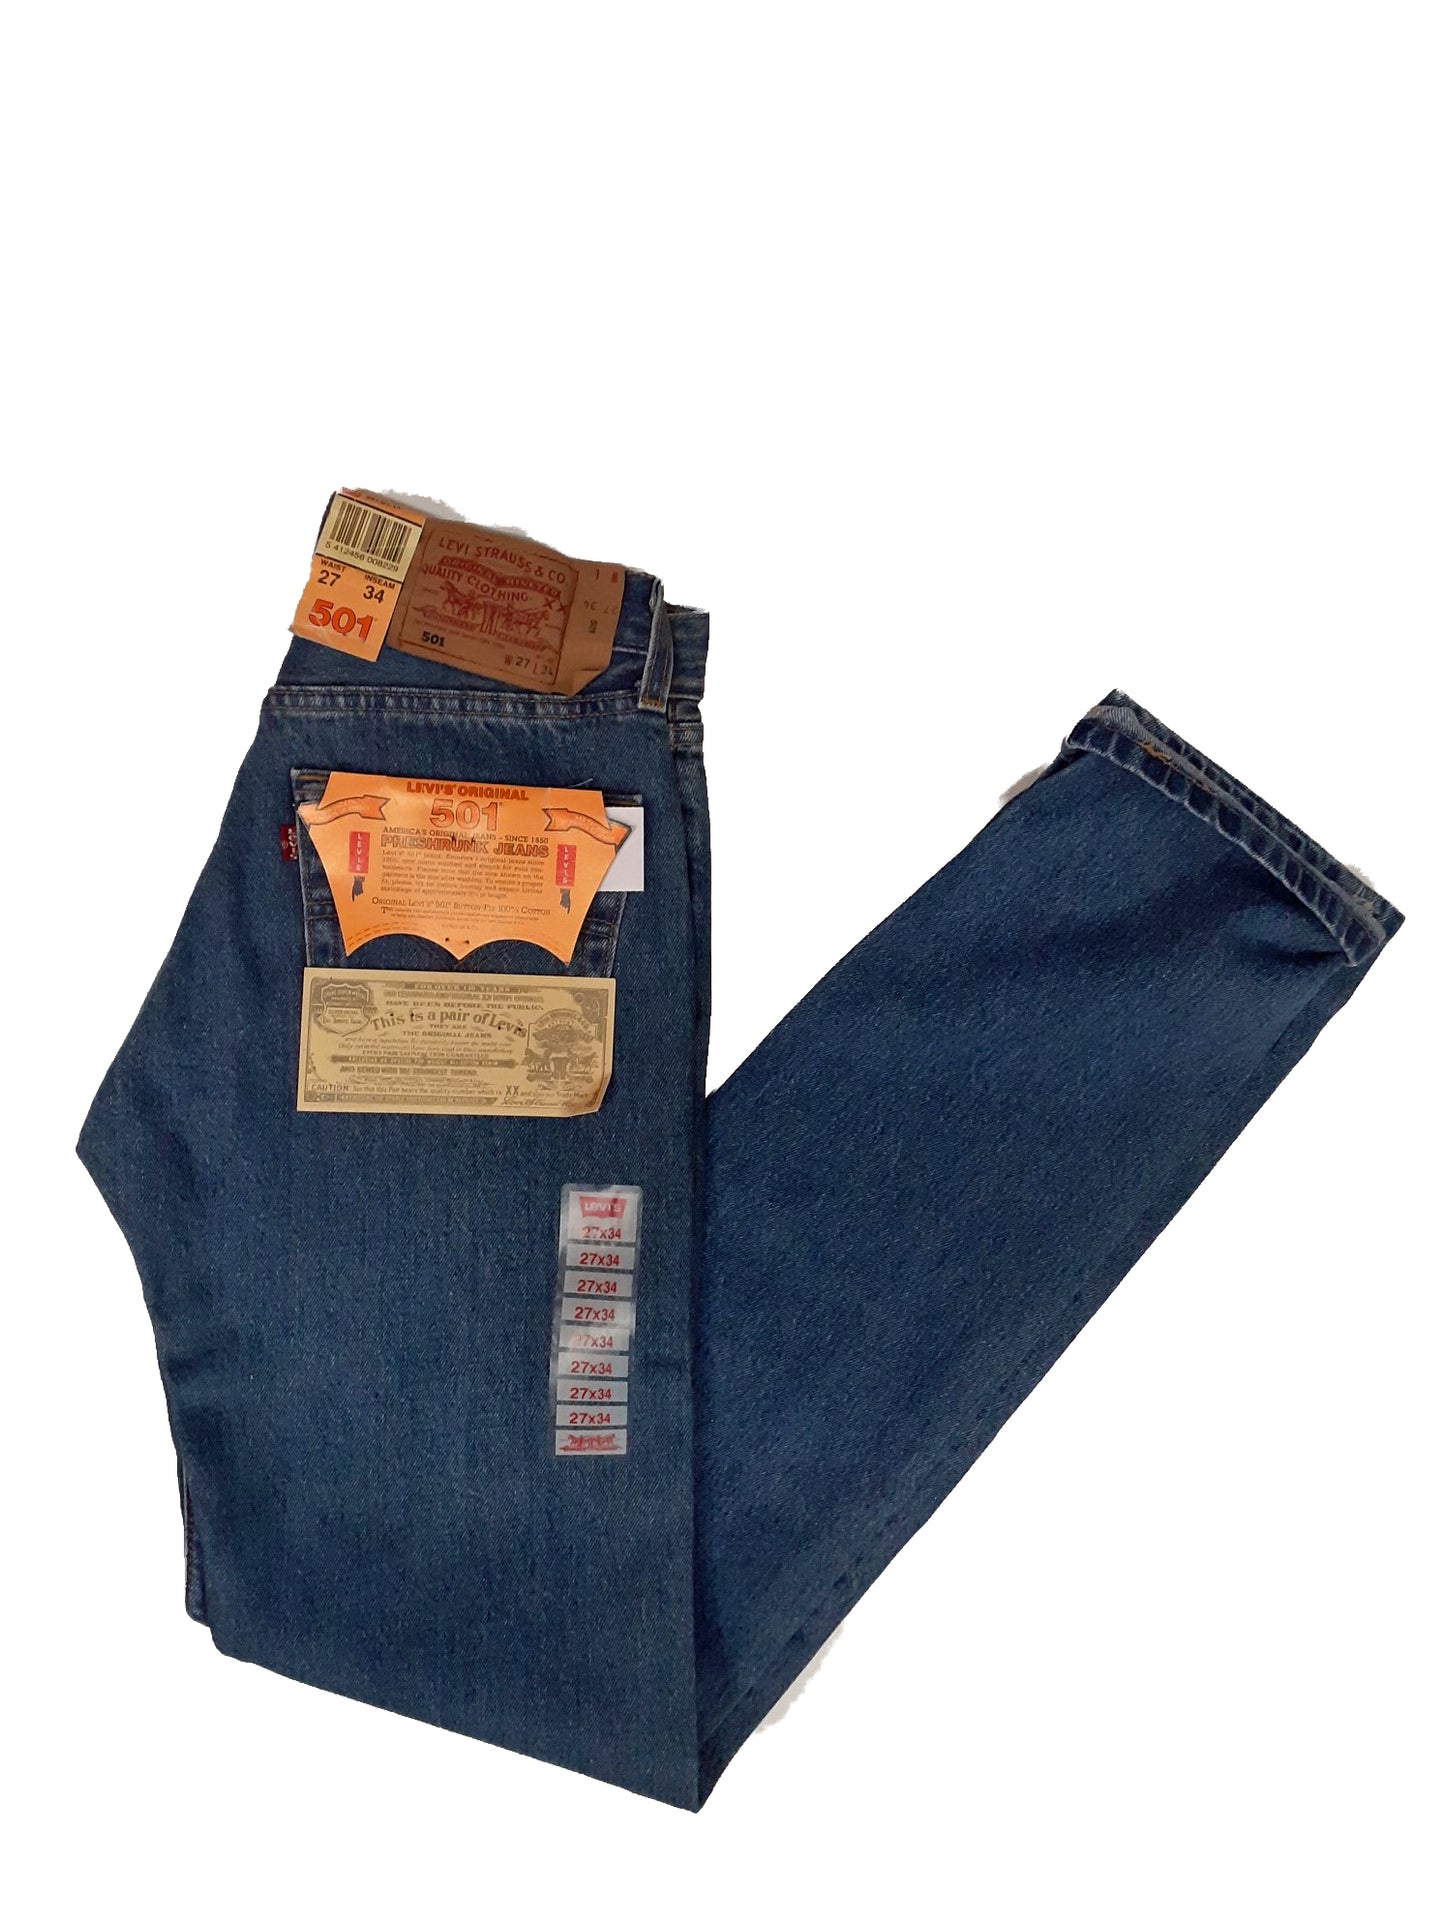 Levi's Jeans 501 Stone Washed